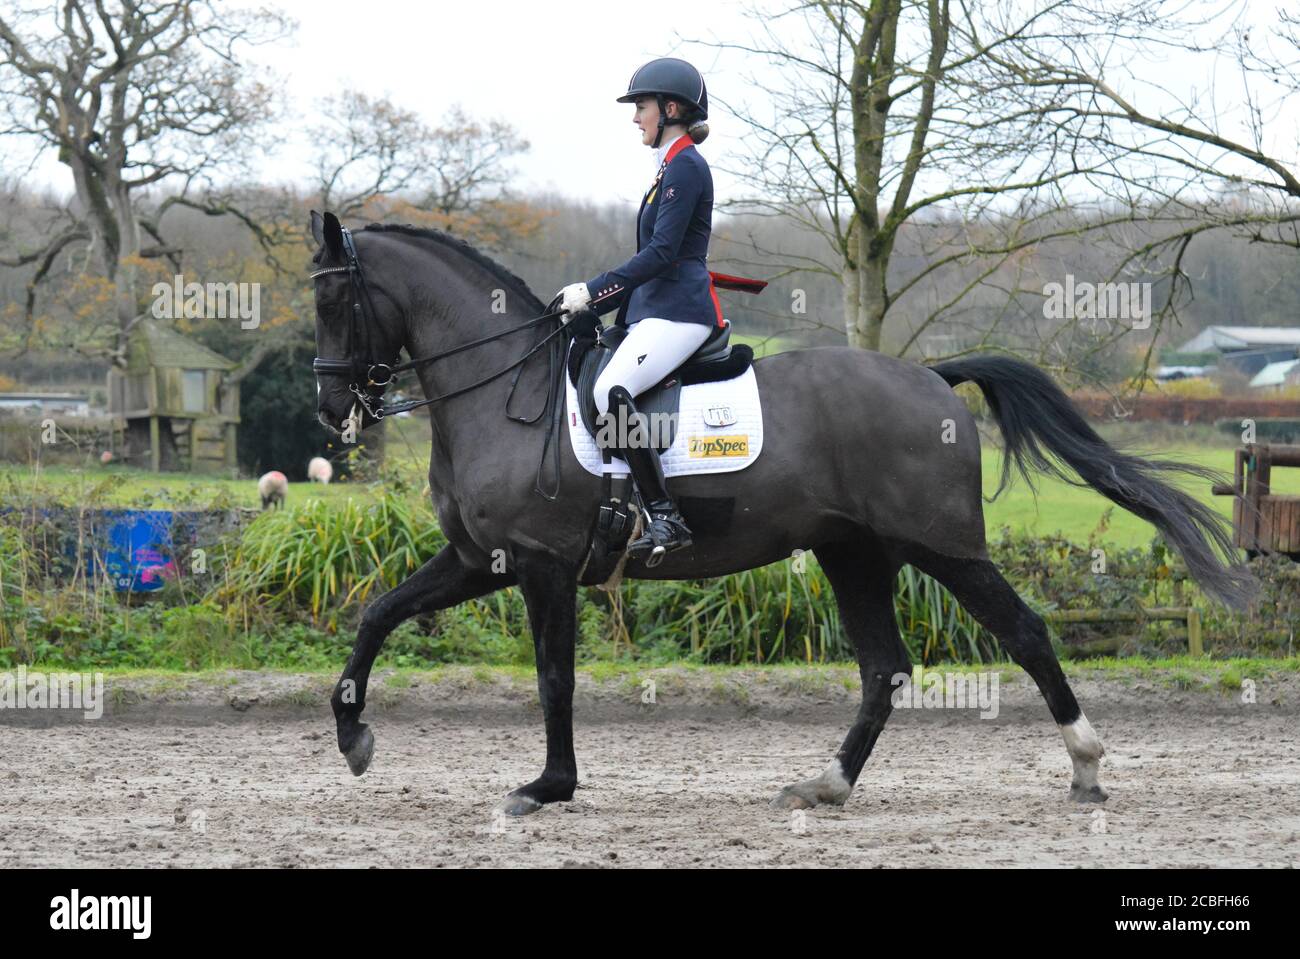 Holly Kerslake (Team GB) riding her horse in a dressage test. Stock Photo